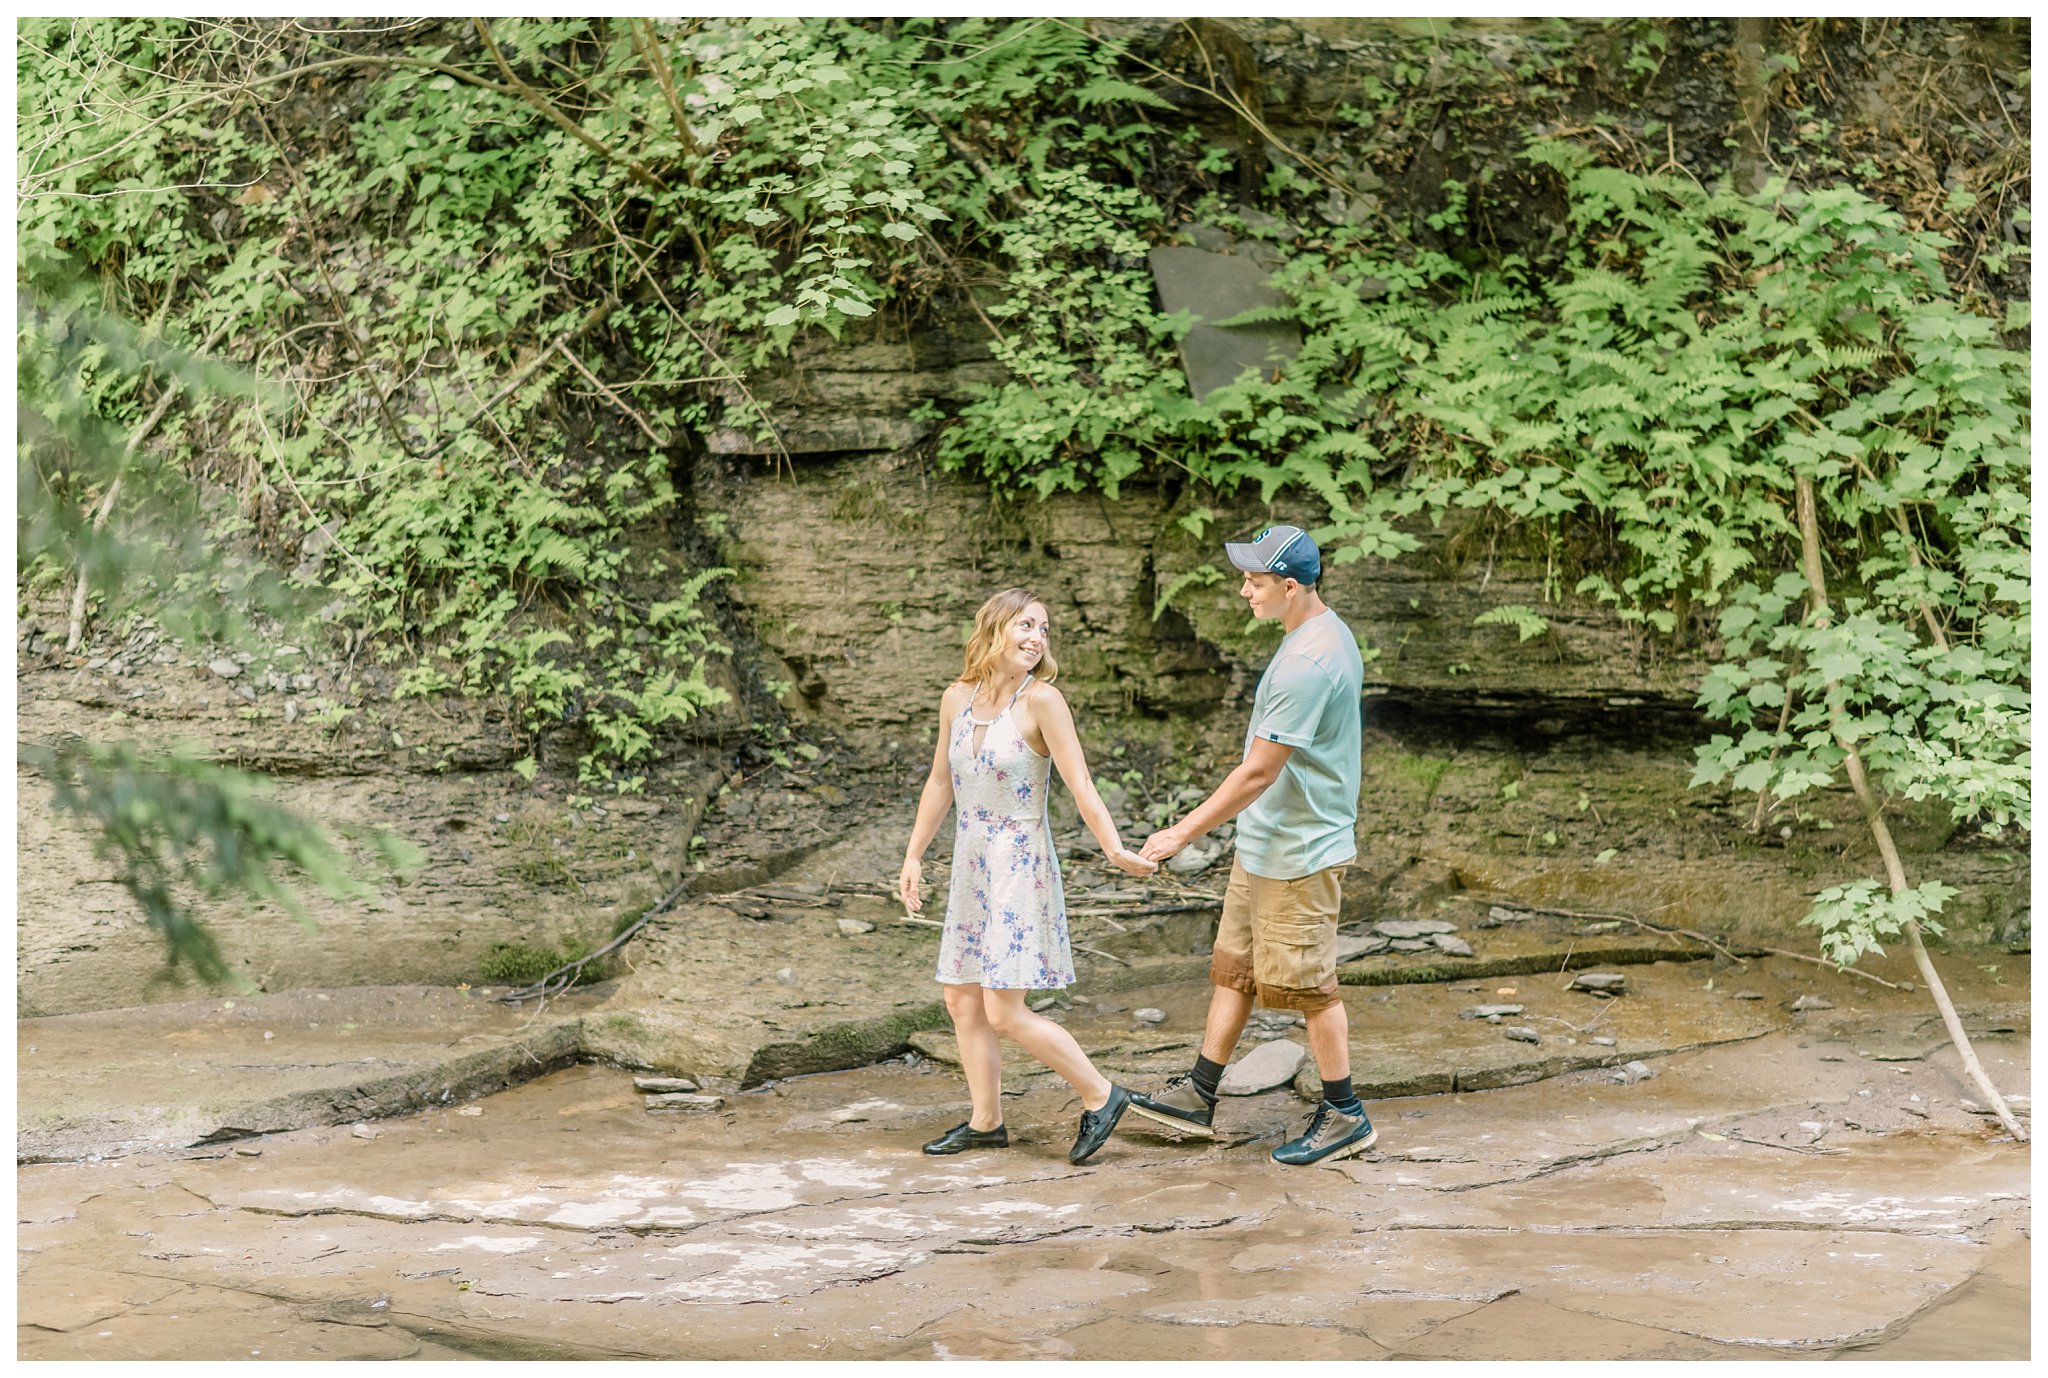 Joanna Young Photography Elizabeth and Cody Engagement Session_0016.jpg